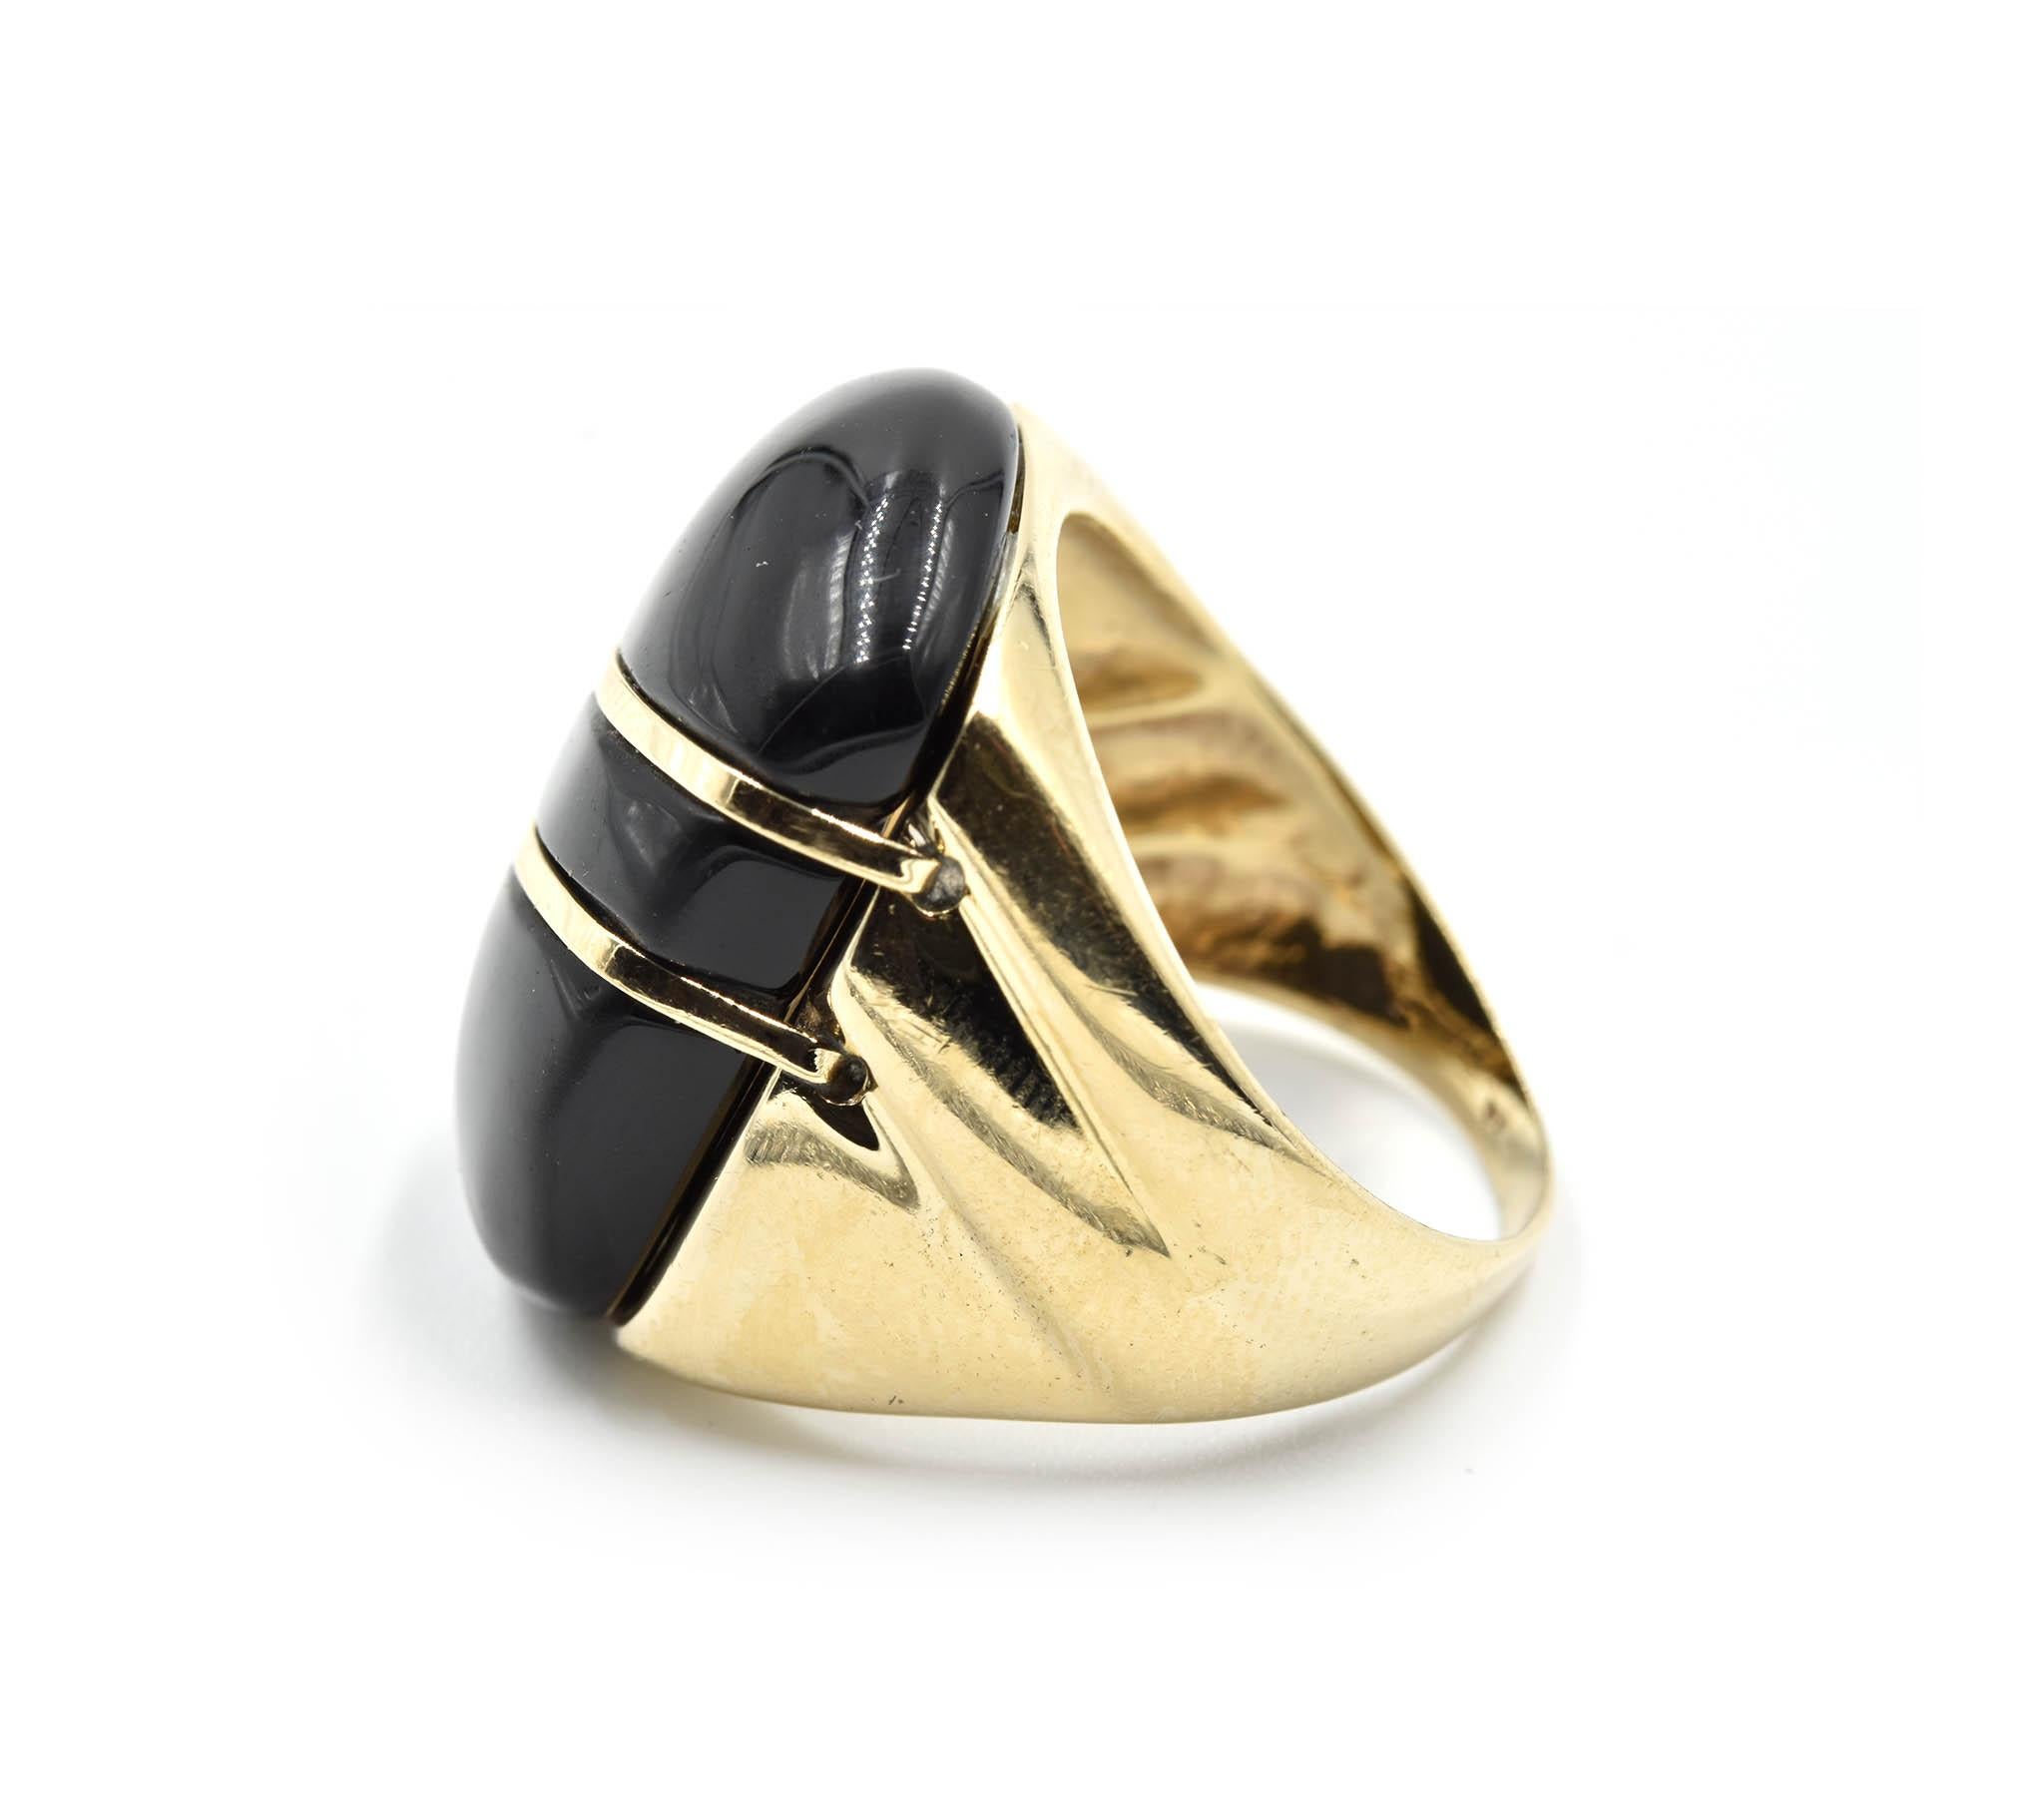 Designer: custom design
Material: 14k yellow gold
Dimensions: ring top is 1 inches long
Ring Size: 7 ¼ (please allow two extra shipping days for sizing requests) 
Weight: 11.70 grams
